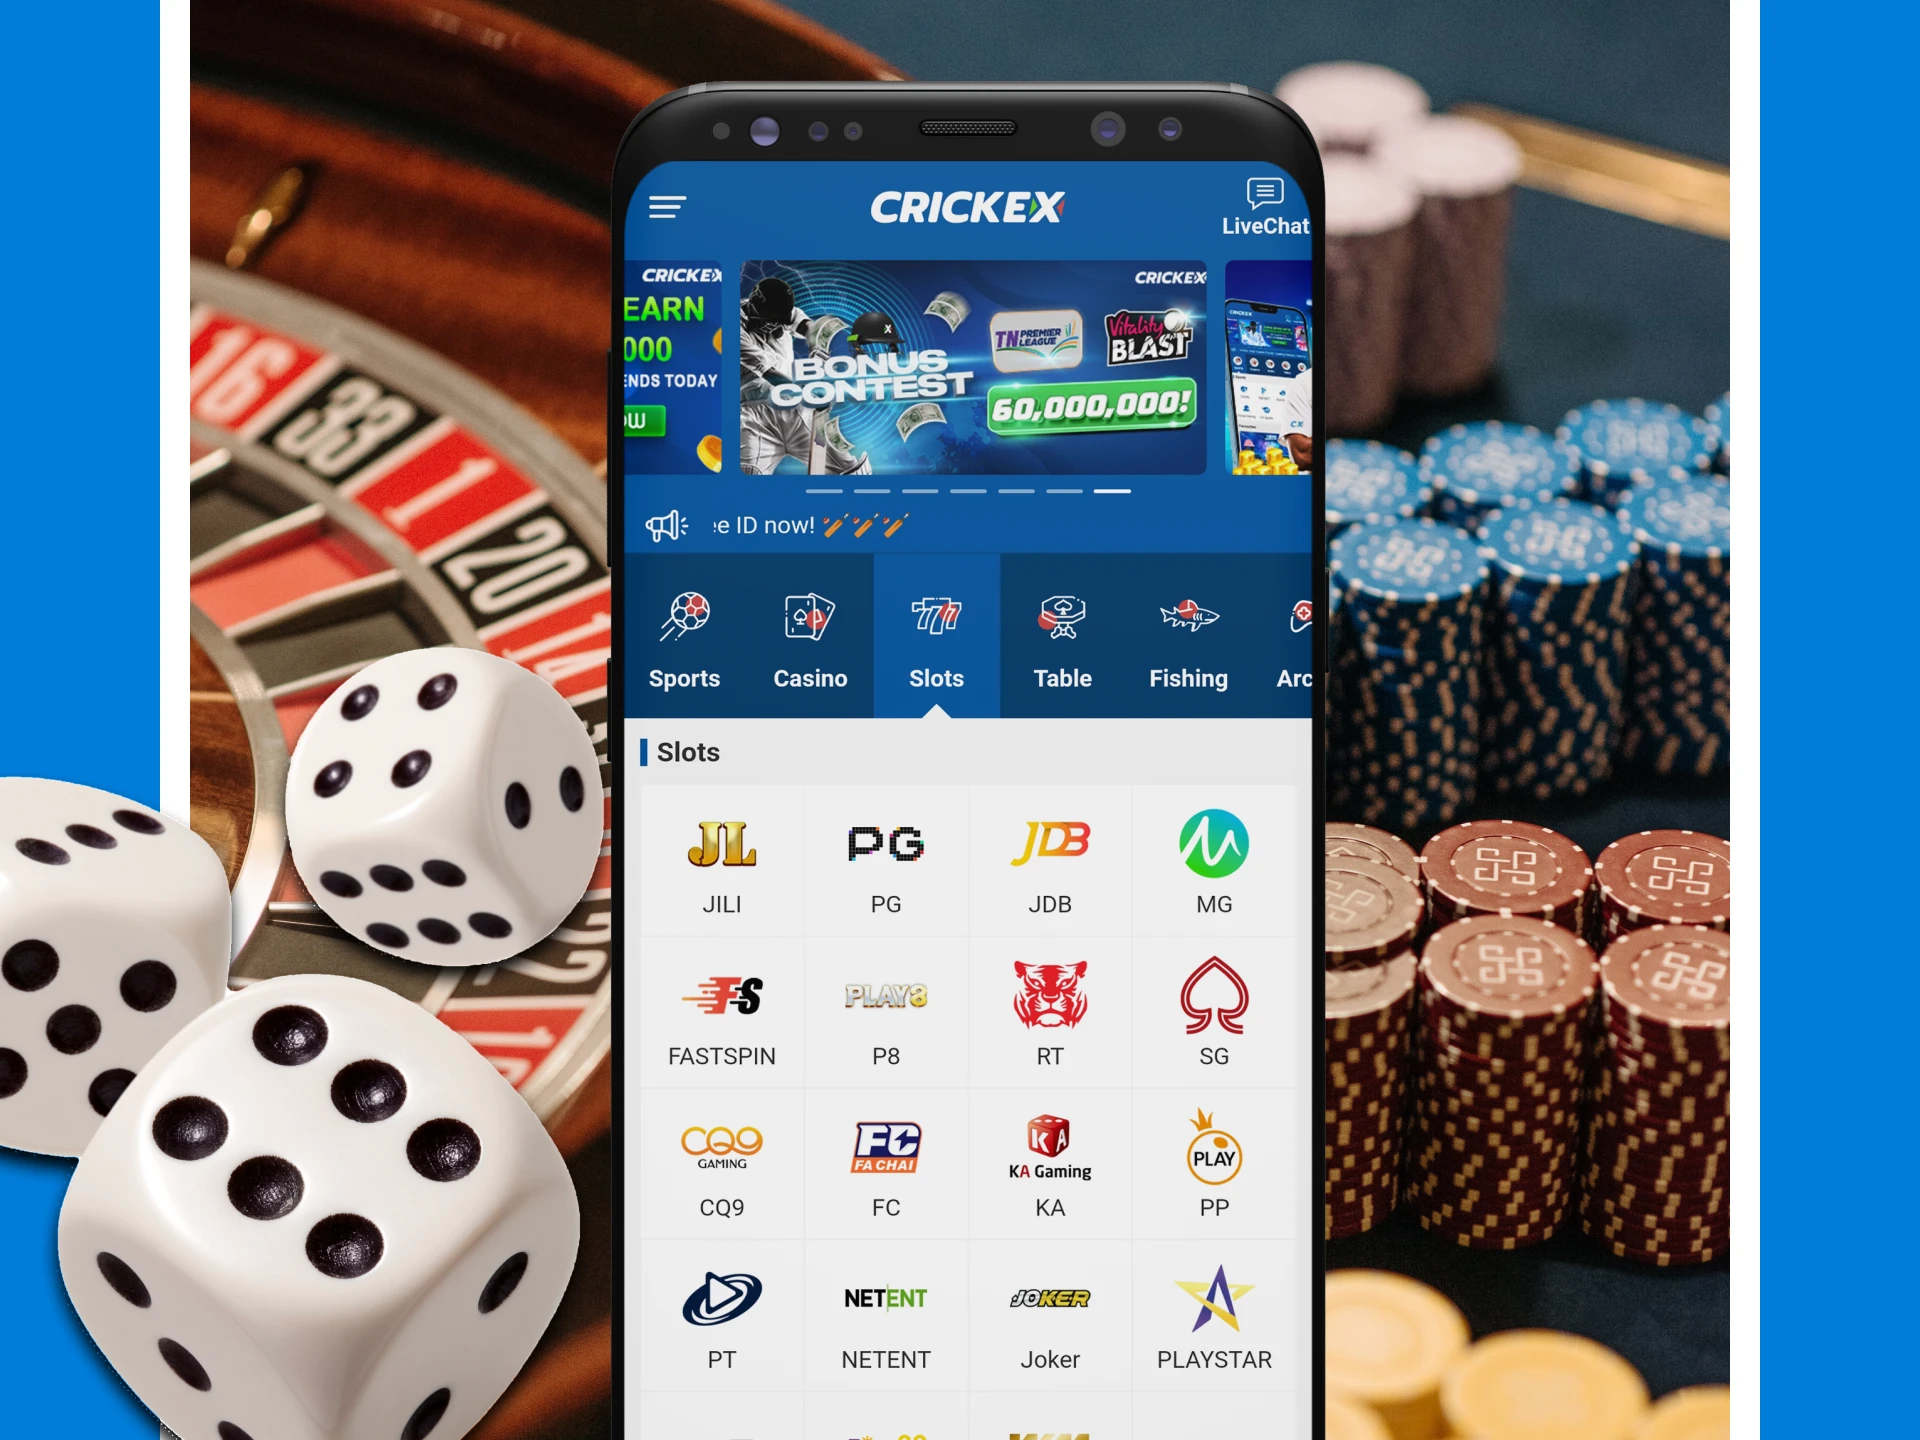 You can play at the casino through the Crickex app.